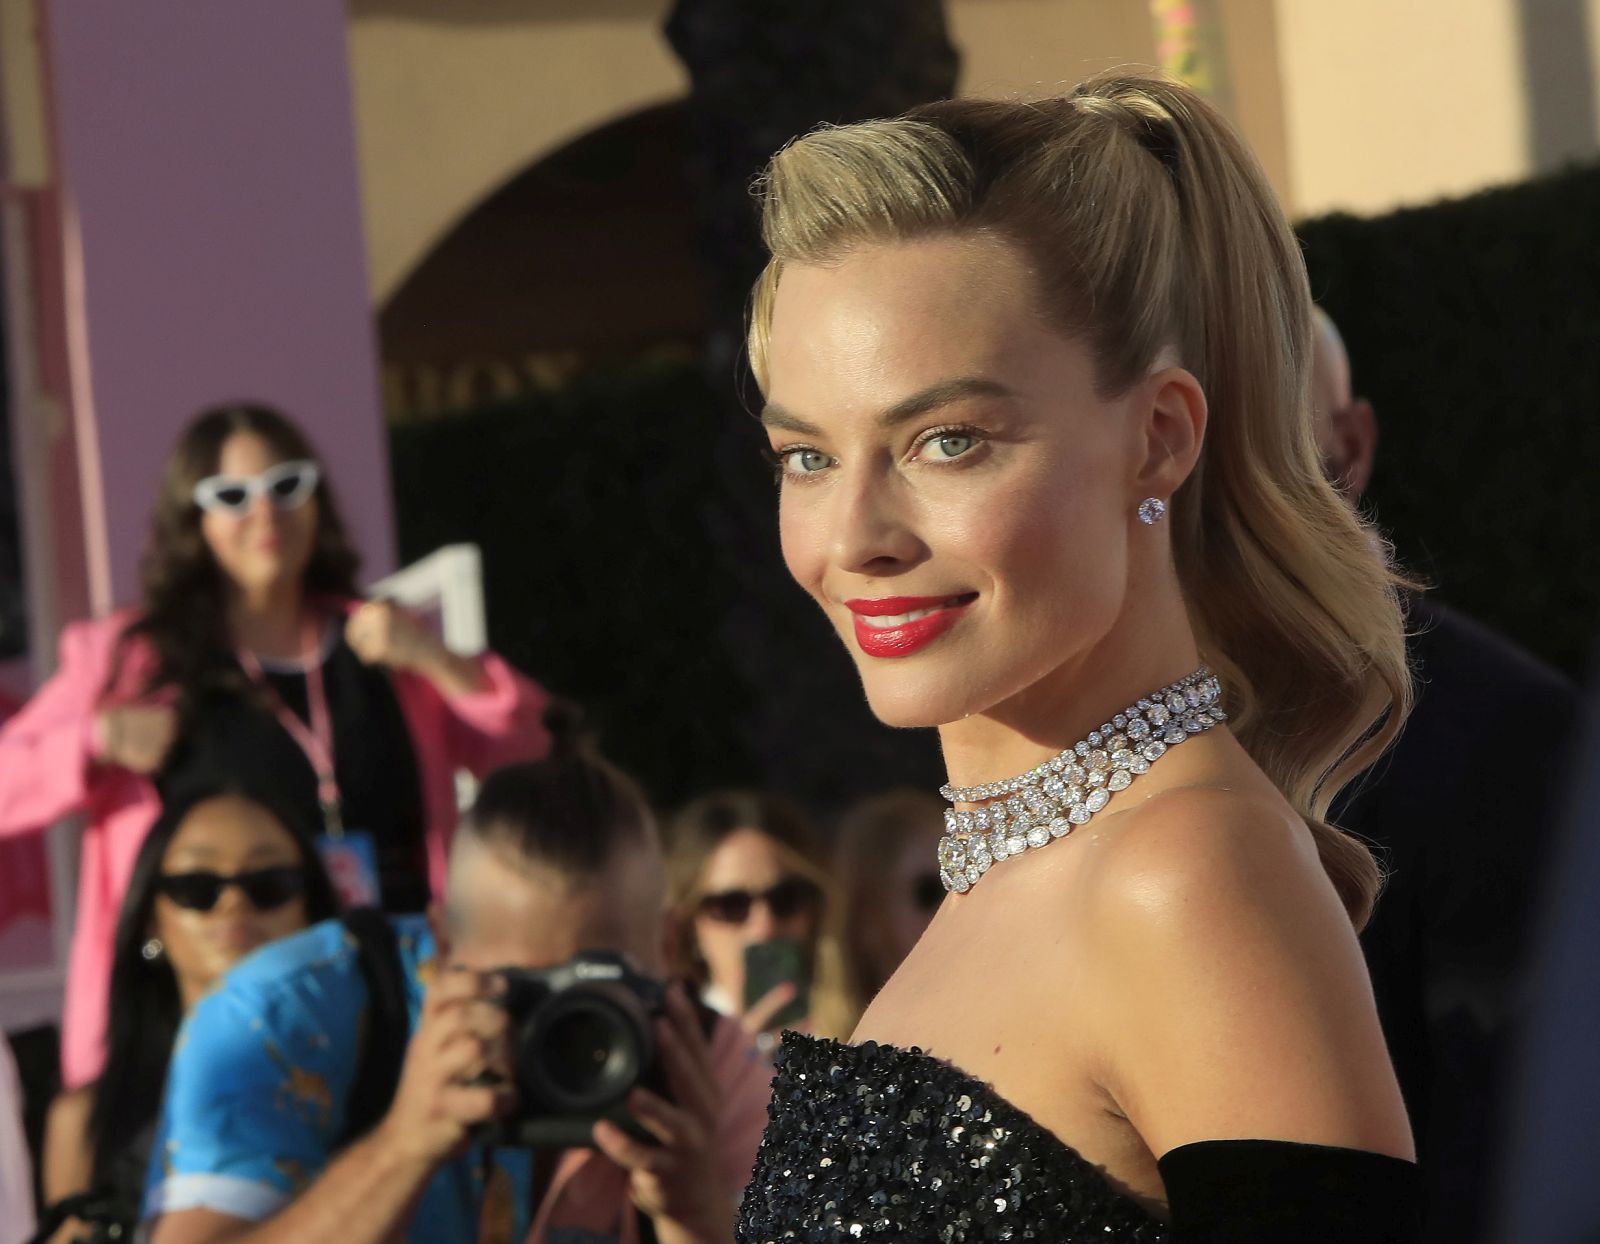 epa10737072 Margot Robbie attends the premiere of Barbie at the Shrine Auditorium in Los Angeles, California, USA, 09 July 2023 (issued 10 July 2023). The movie will be released in theaters on 21 July 2023.  EPA/NINA PROMMER